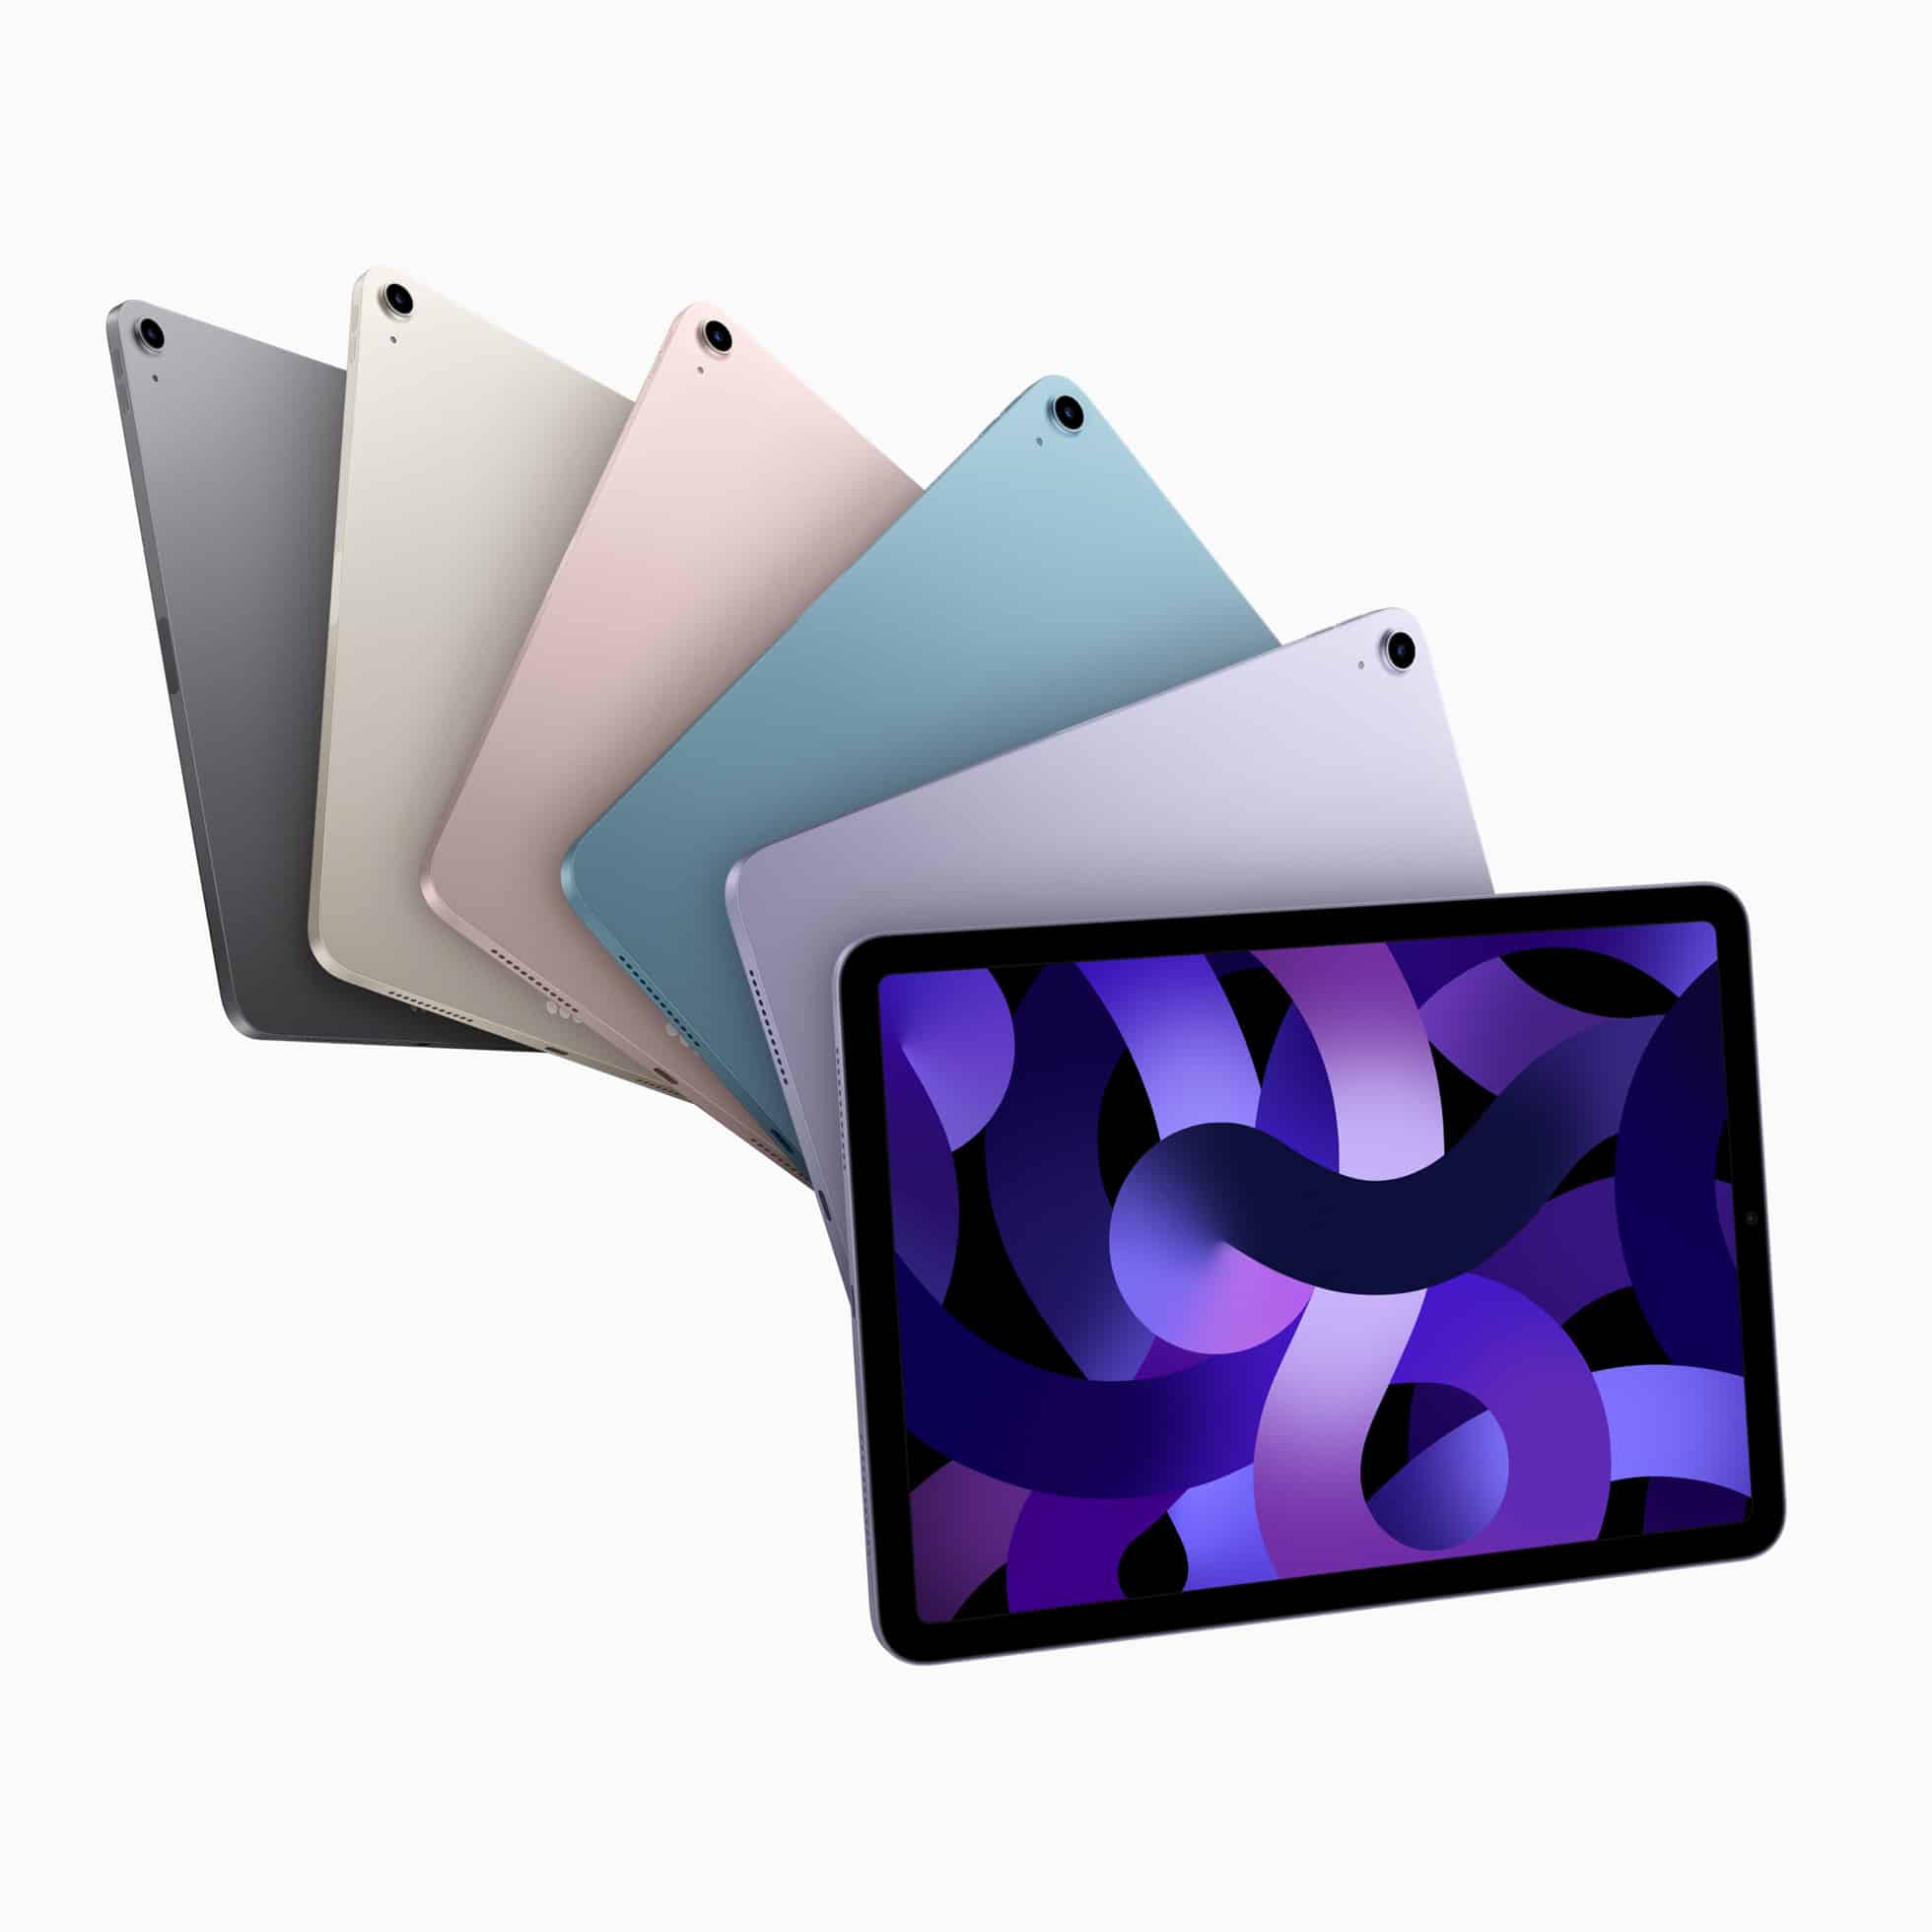 Accessory Maker is Already Selling Cases for the Much Rumored 12.9″ iPad Air